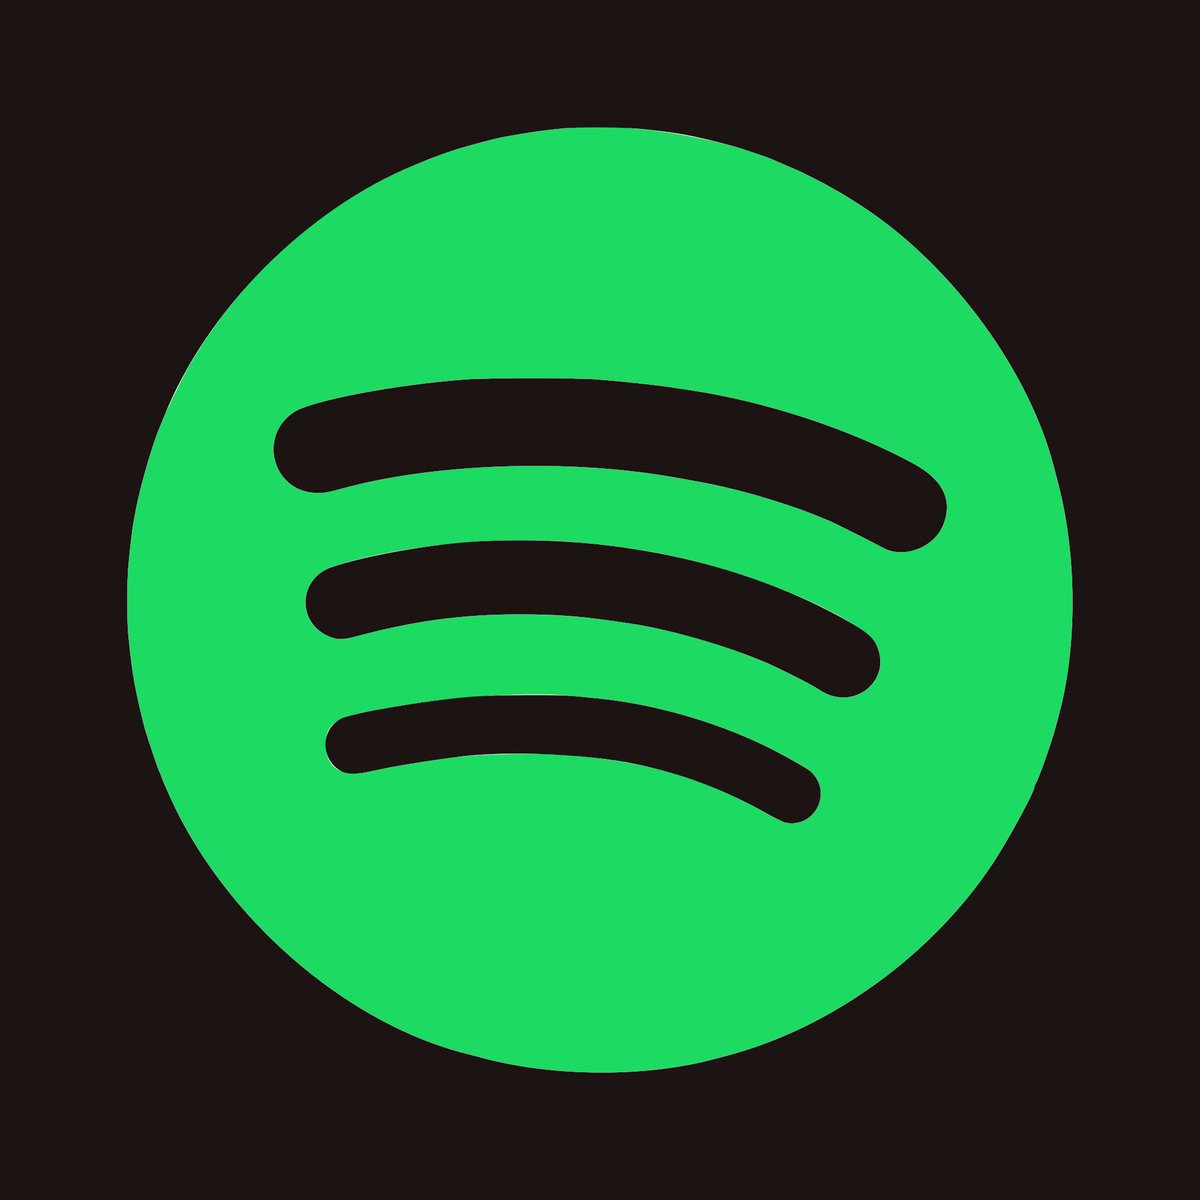 Check out #spotifyplaylist ' Emerging Artists '    
great selection of music for your ears :) @bluescarrmusic 
open.spotify.com/playlist/5ABKW…
#music #NewPlaylist #playlistadd
#spotifymusic #newtalentmusic #musicartist